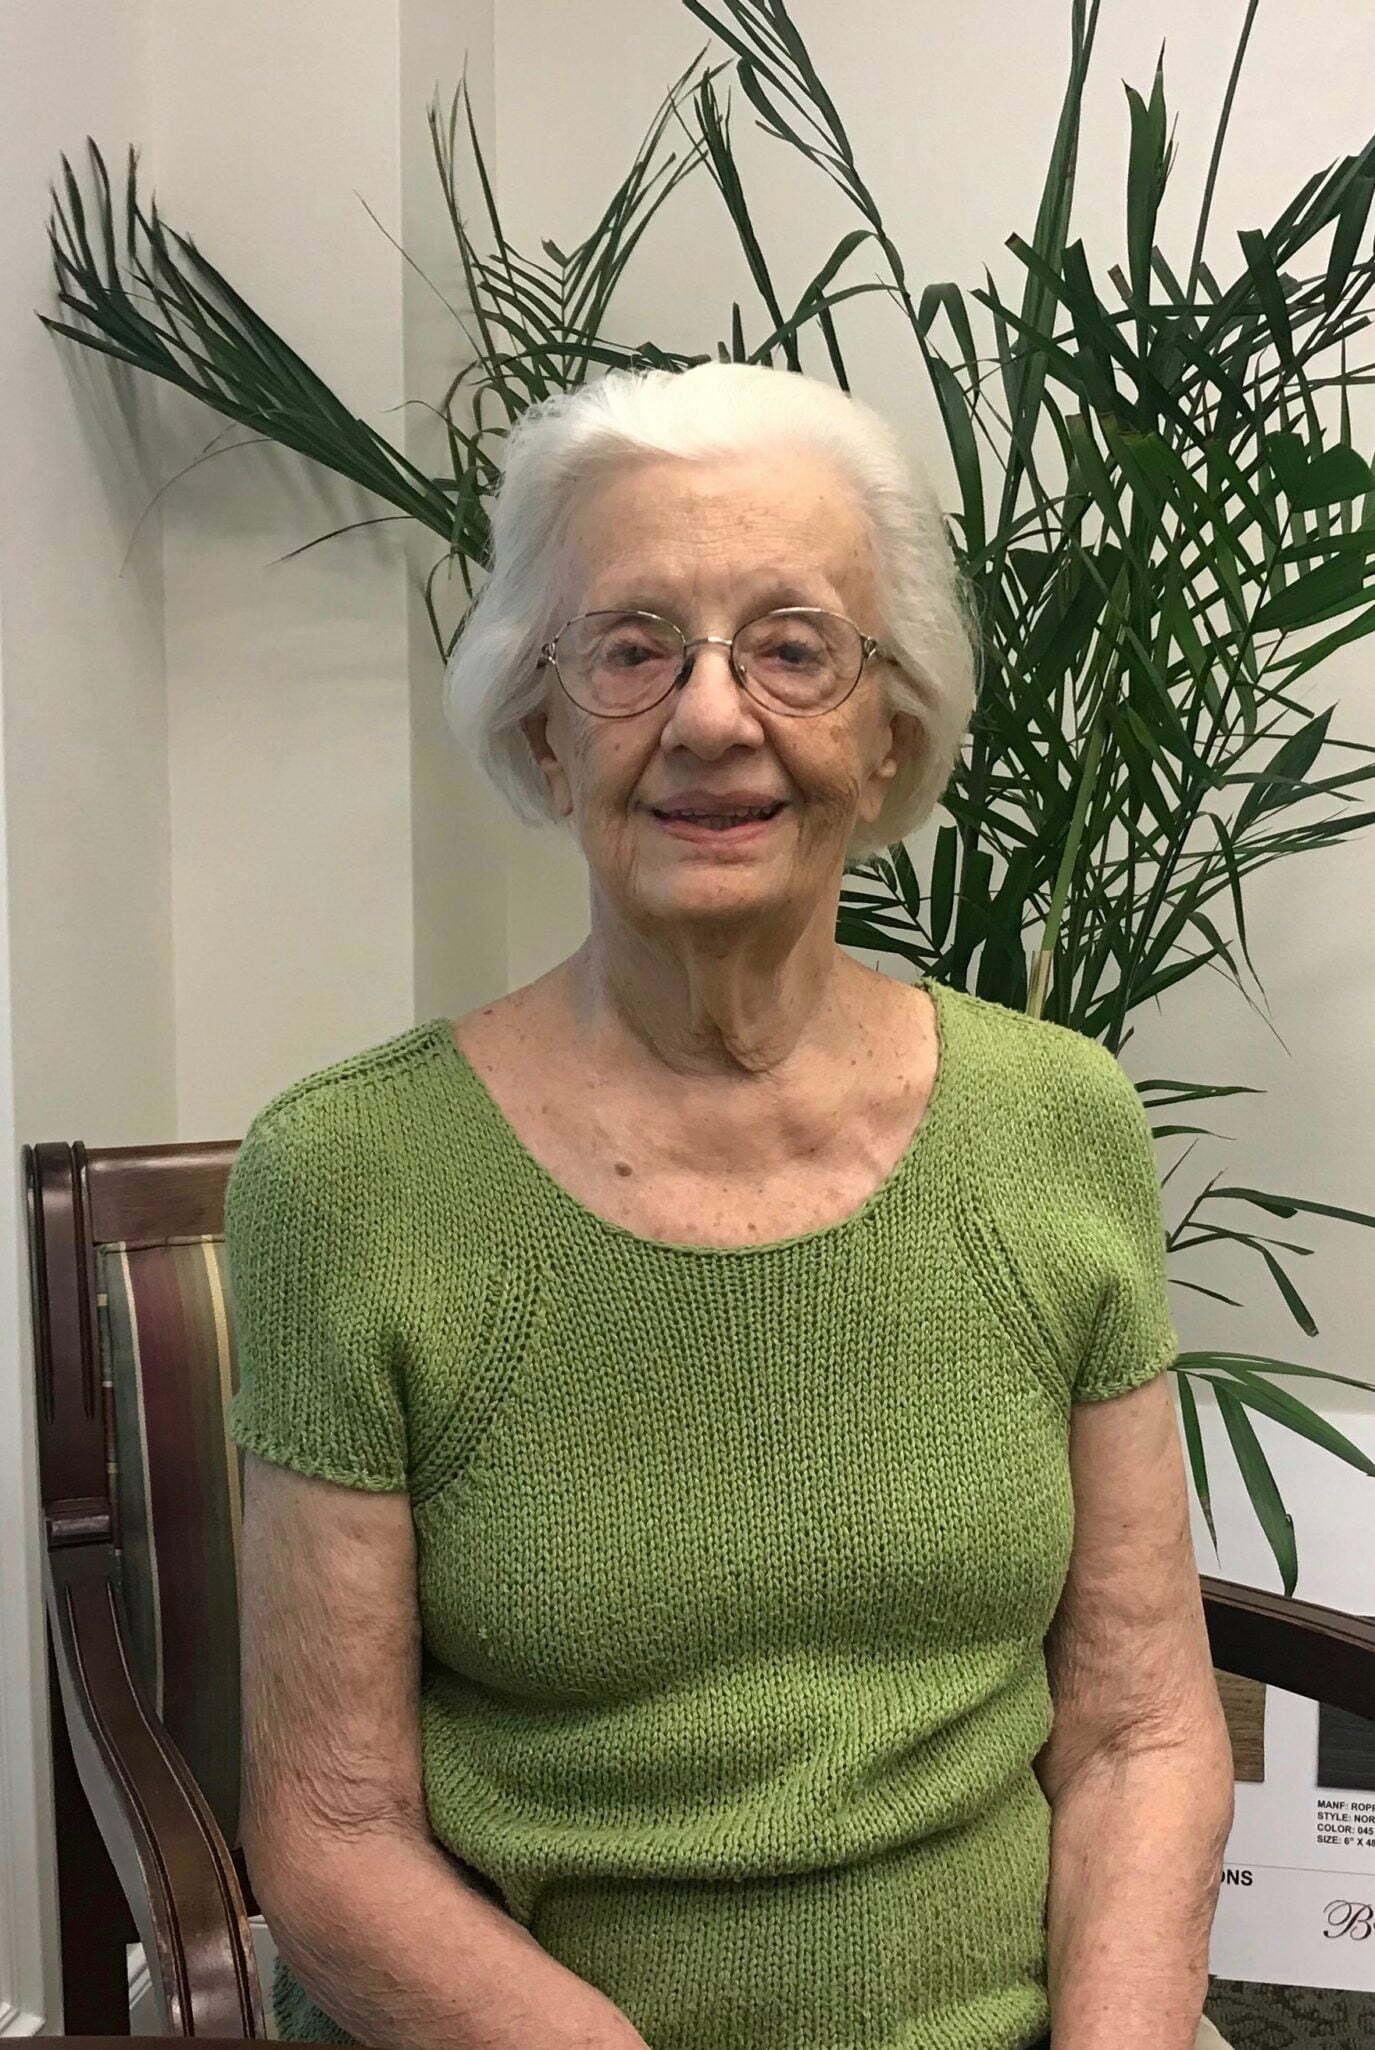 Helen O’Keefe, a resident at The Buckingham, a senior living community in Houston